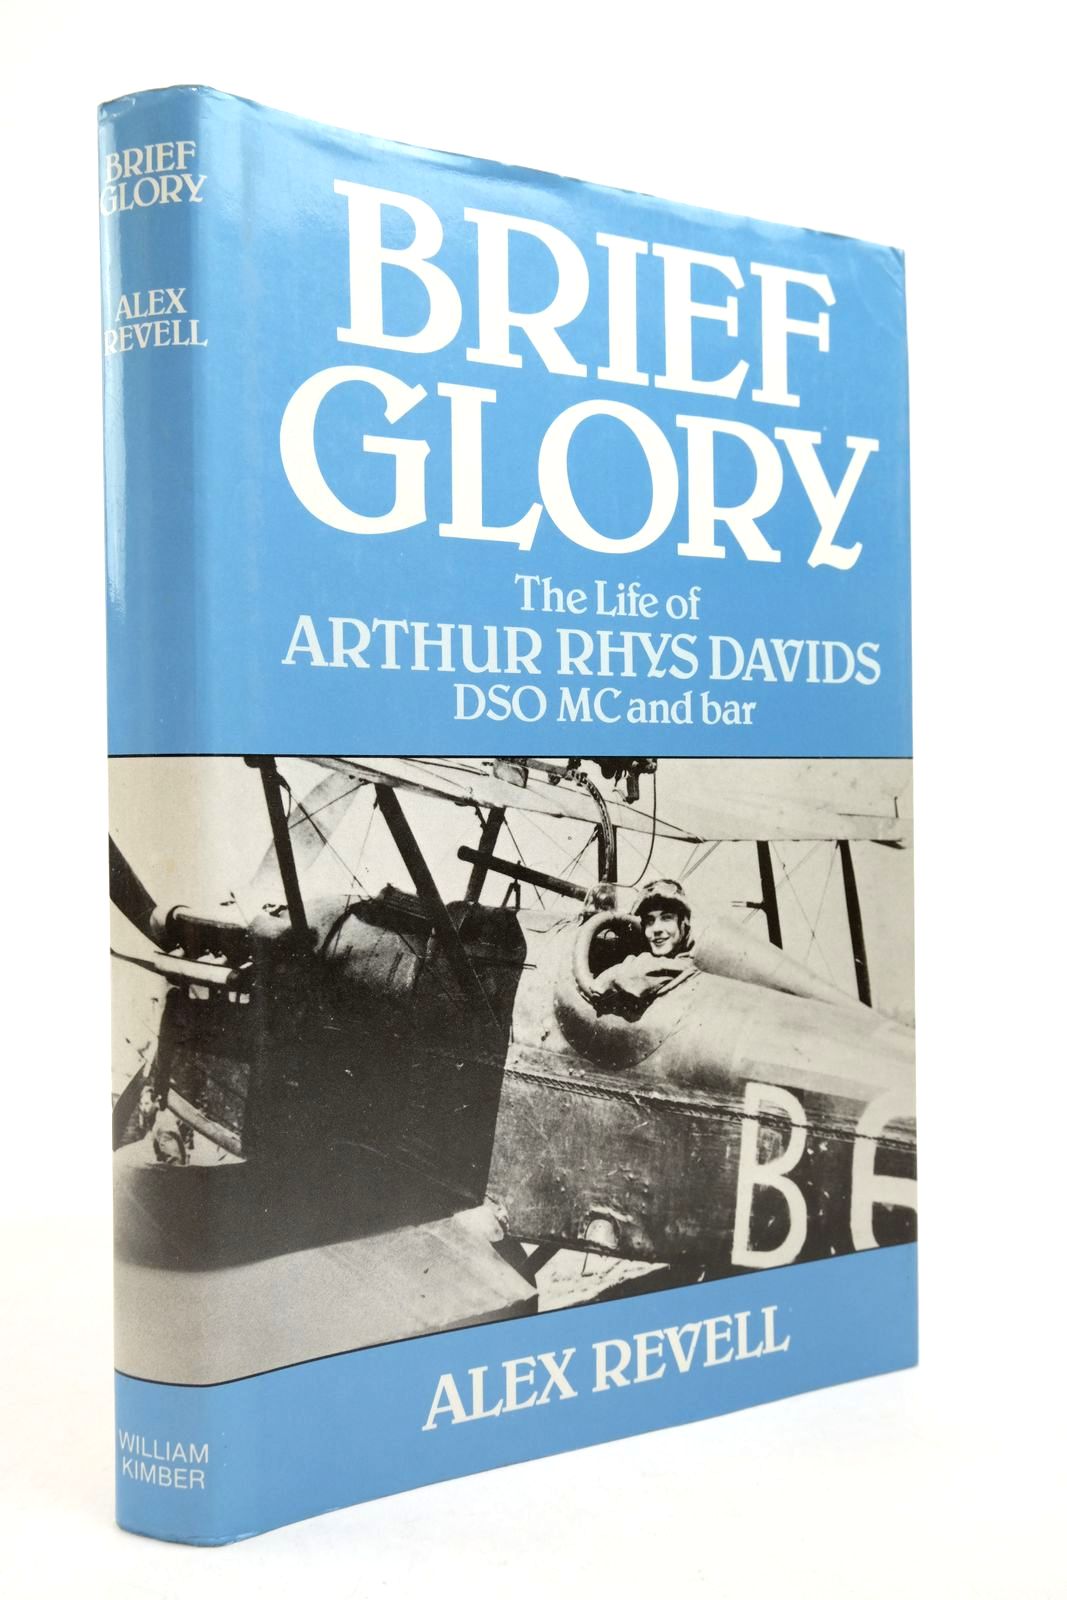 Photo of BRIEF GLORY: THE LIFE OF ARTHUR RHYS DAVIDS written by Revell, Alex published by William Kimber & Co. Limited (STOCK CODE: 2139812)  for sale by Stella & Rose's Books